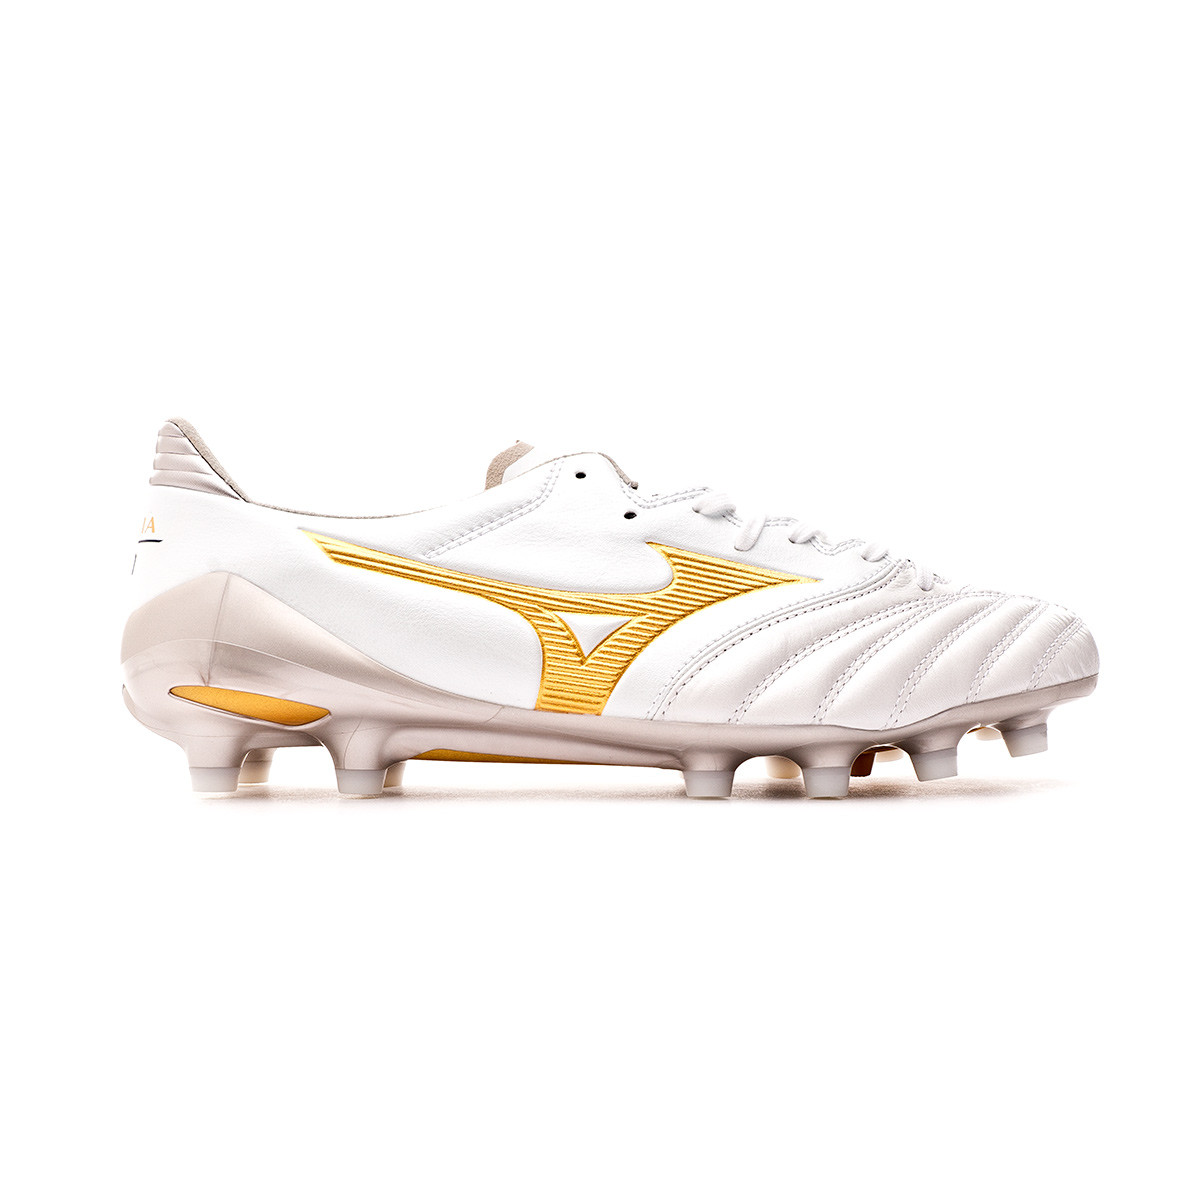 white and gold soccer boots